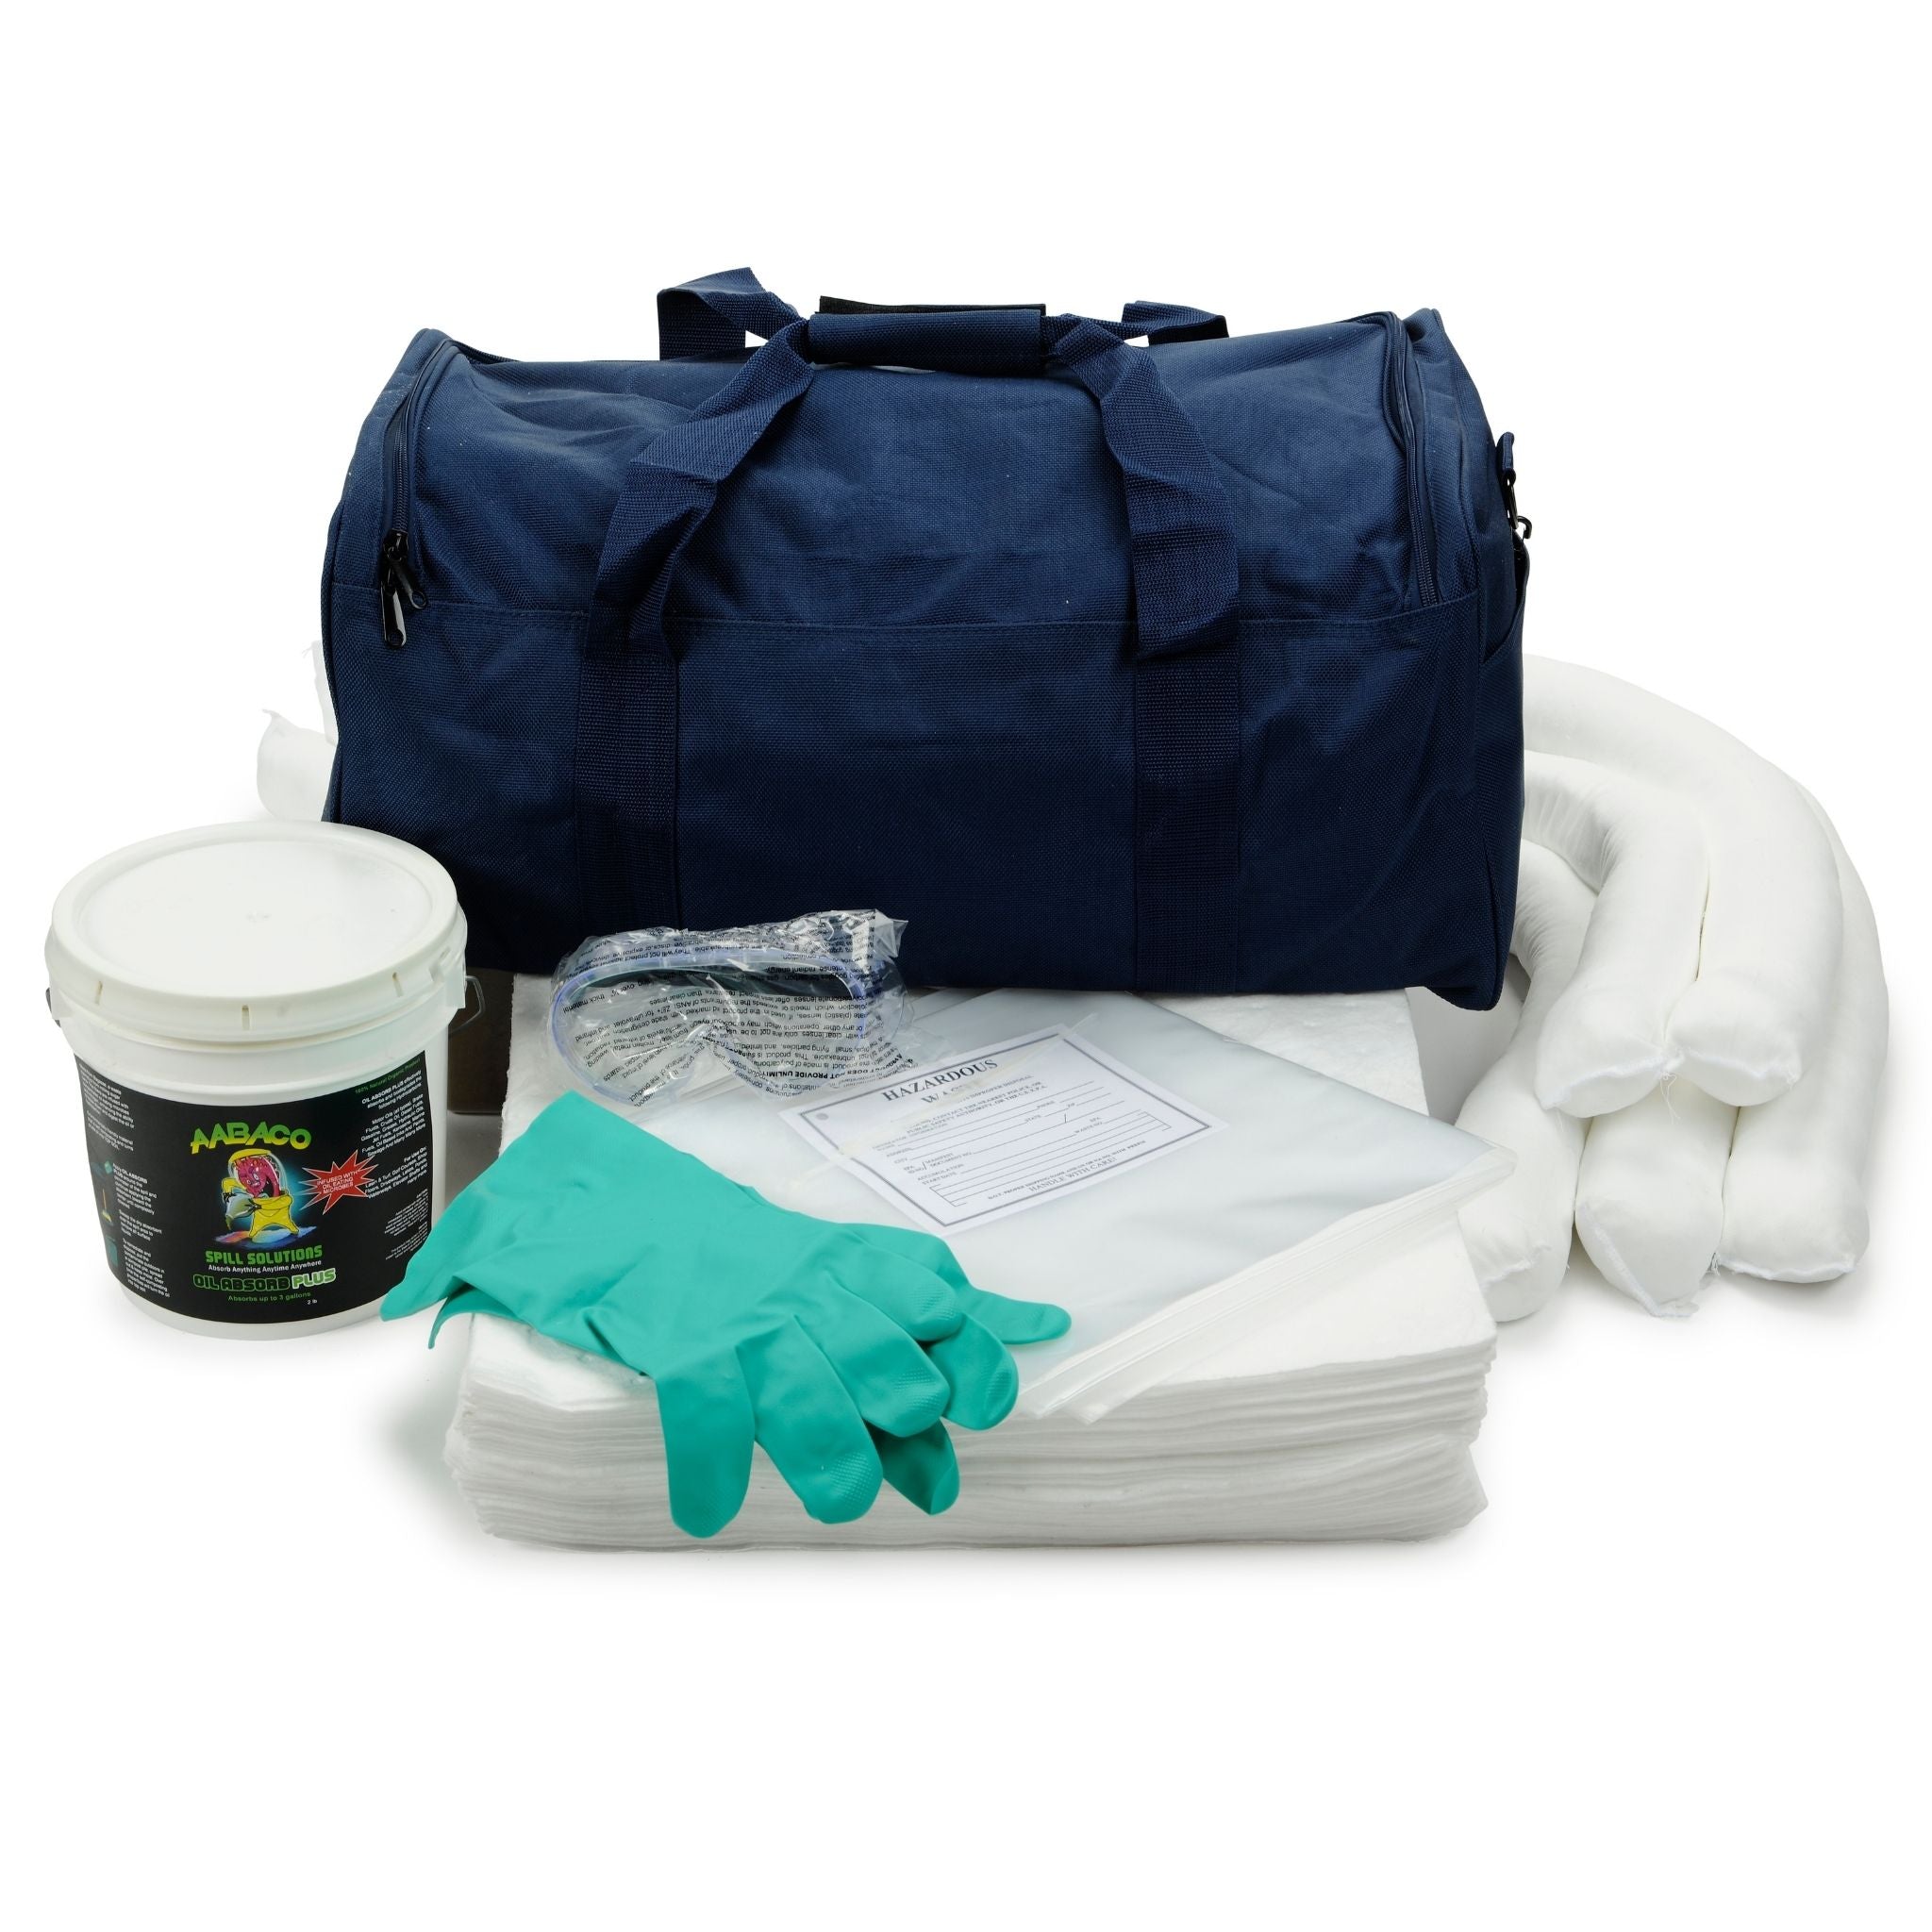 AABACO OIL ONLY SPILL KIT IN DUFFEL BAG – 16 GALLONS